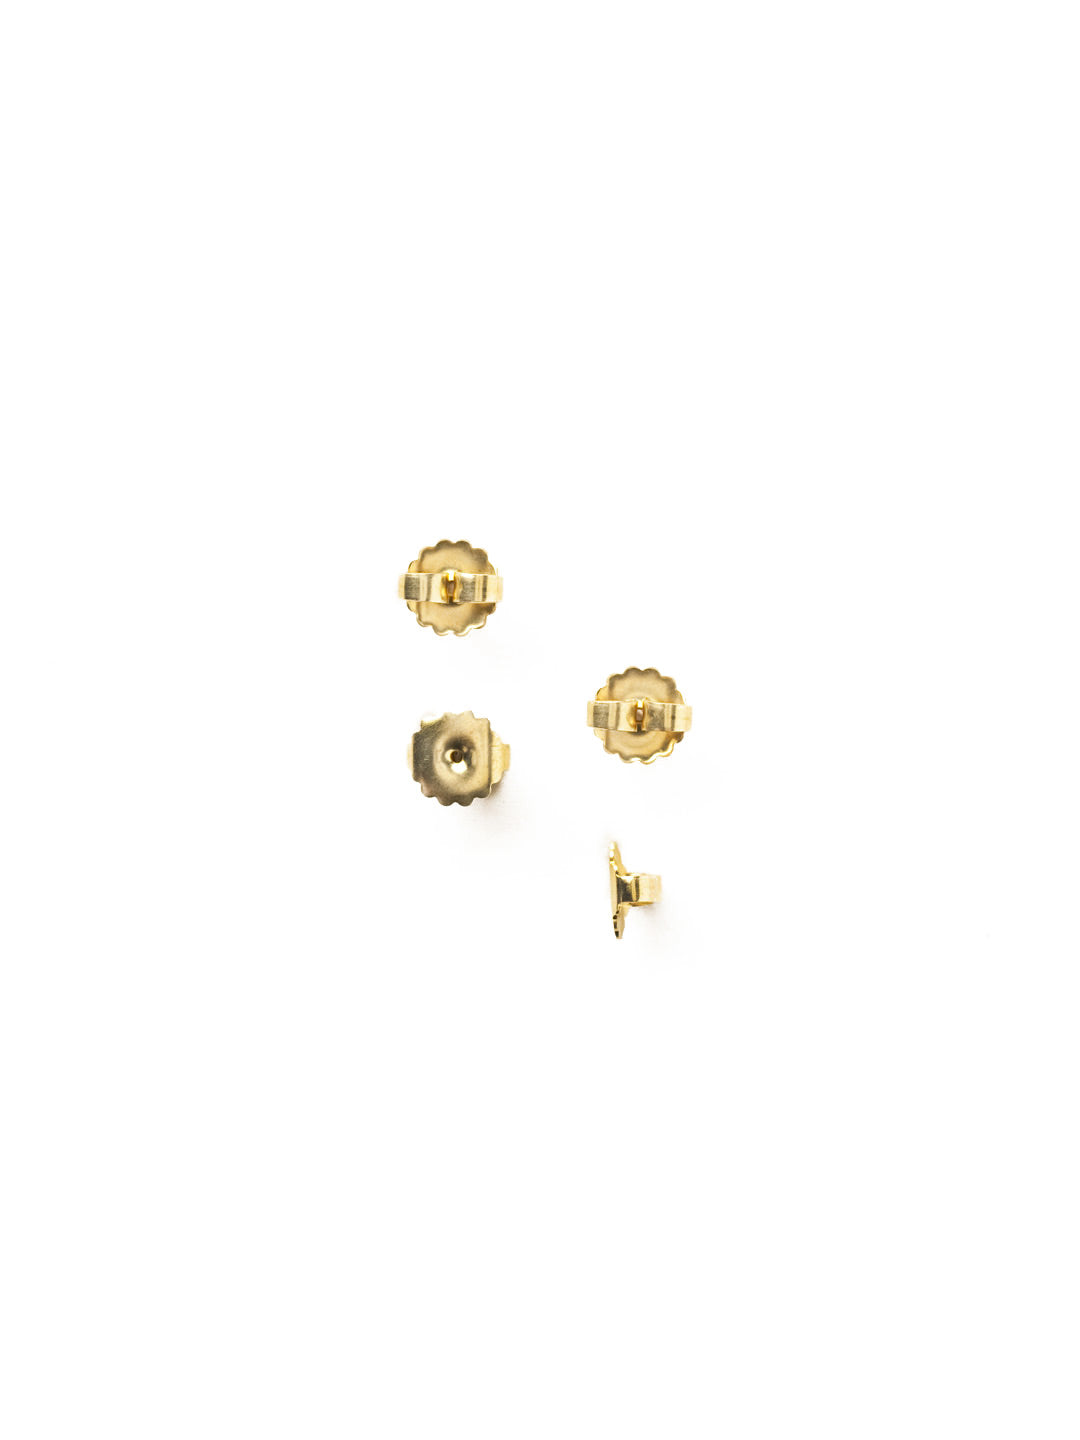 Monster Earring Backs (4 Pack) - MBLG1AG - This 4 pack of over-sized earring backs give you the comfort and stability to wear our earrings all day long!Antique Gold-tone finish